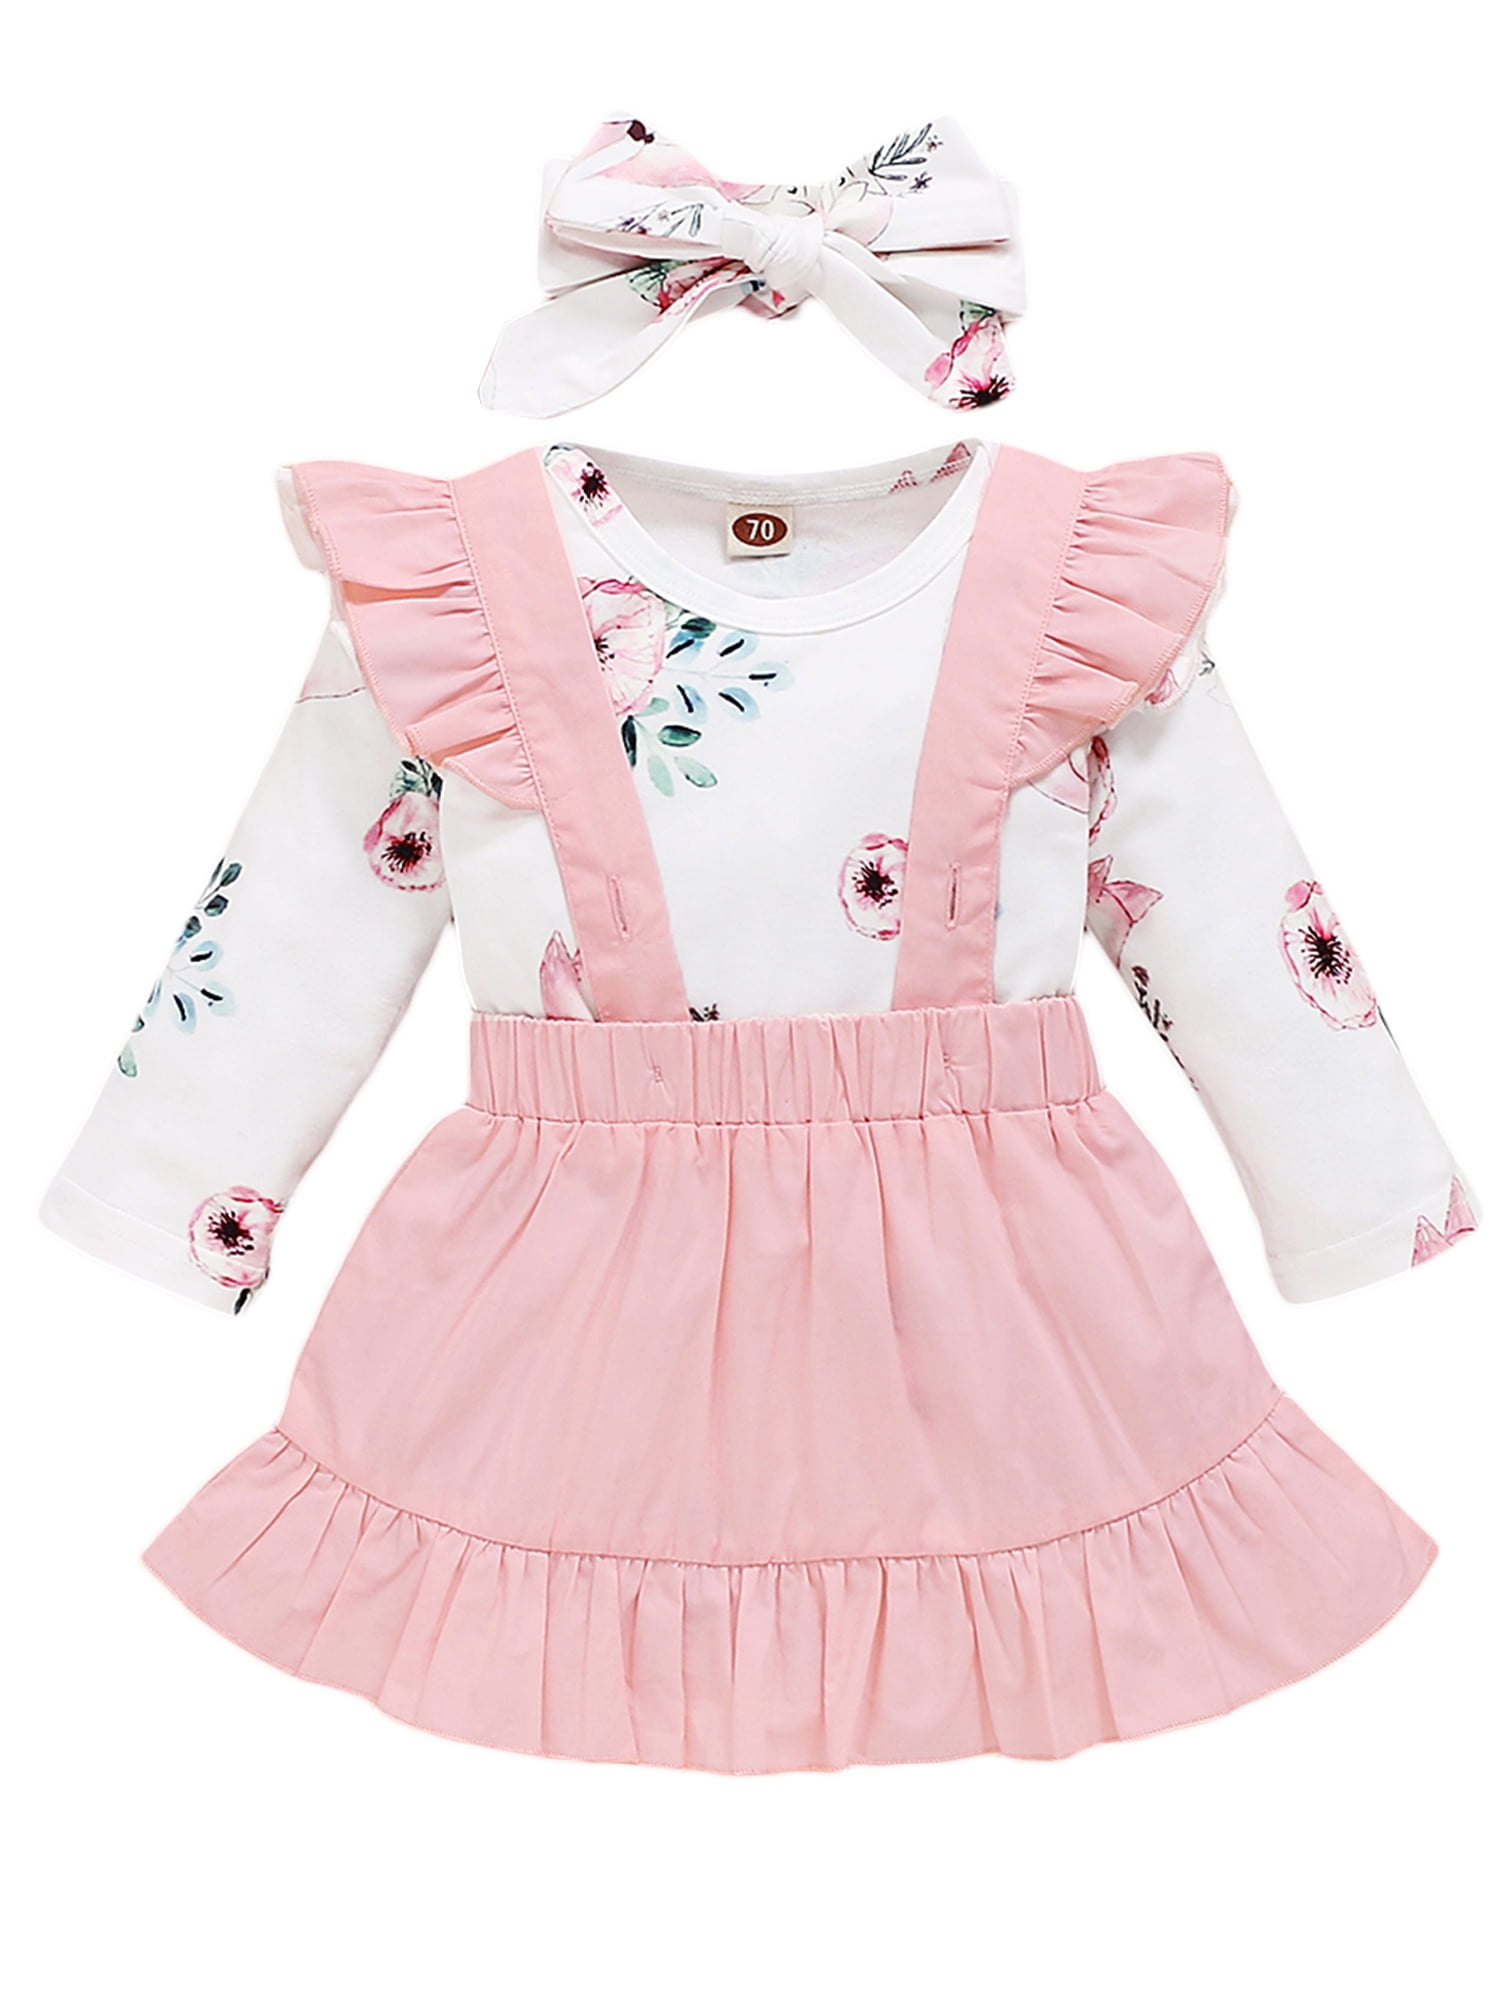 2Pcs Set Newborn Baby Girl Outift Ruffle Sleeve White T-Shirt Tops+Suspender Pleated Skirt Overalls Clothes 